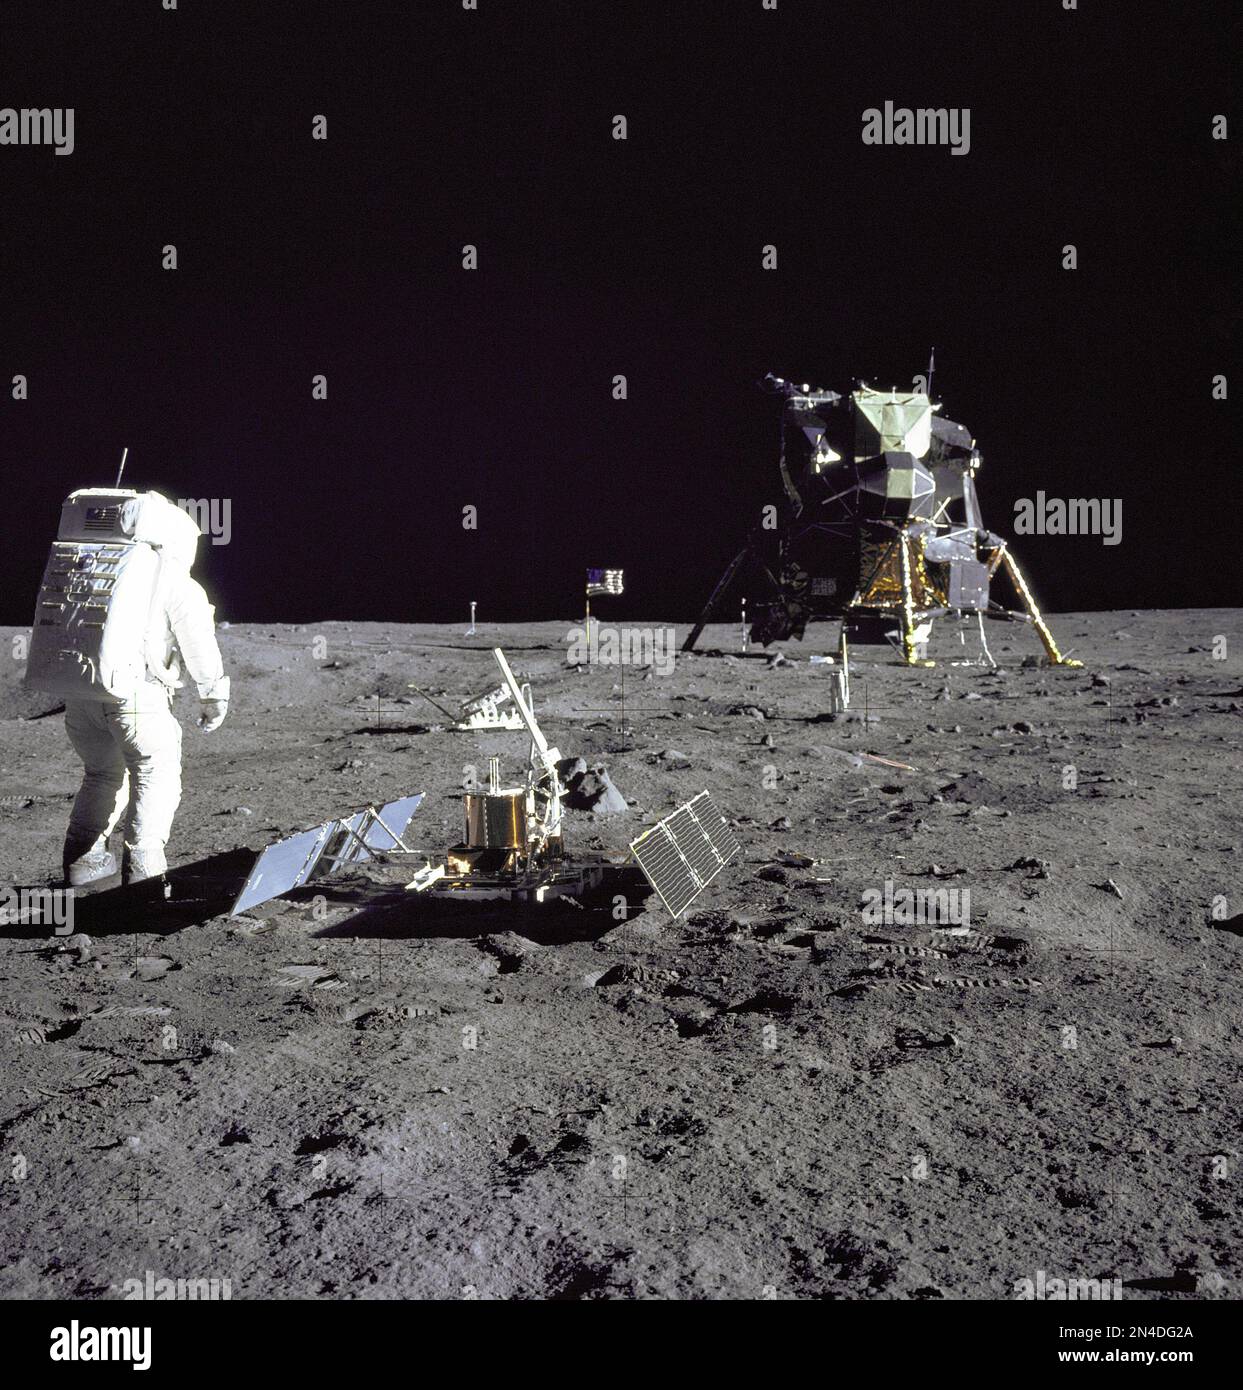 Astronaut Edwin E.'Buzz' Aldrin Jr., Lunar Module pilot, is photographed during the Apollo 11 extravehicular activity on the Moon. He has just deployed the Early Apollo Scientific Experiments Package (EASEP). In the foreground is the Passive Seismic Experiment Package (PSEP); beyond it is the Laser Ranging Retro-Reflector (LR-3); in the center background is the United States flag; in the left background is the black and white lunar surface television camera; in the far right background is the Lunar Module 'Eagle'. Astronaut Neil A. Armstrong, commander, took this photograph with a 70mm lunar s Stock Photo